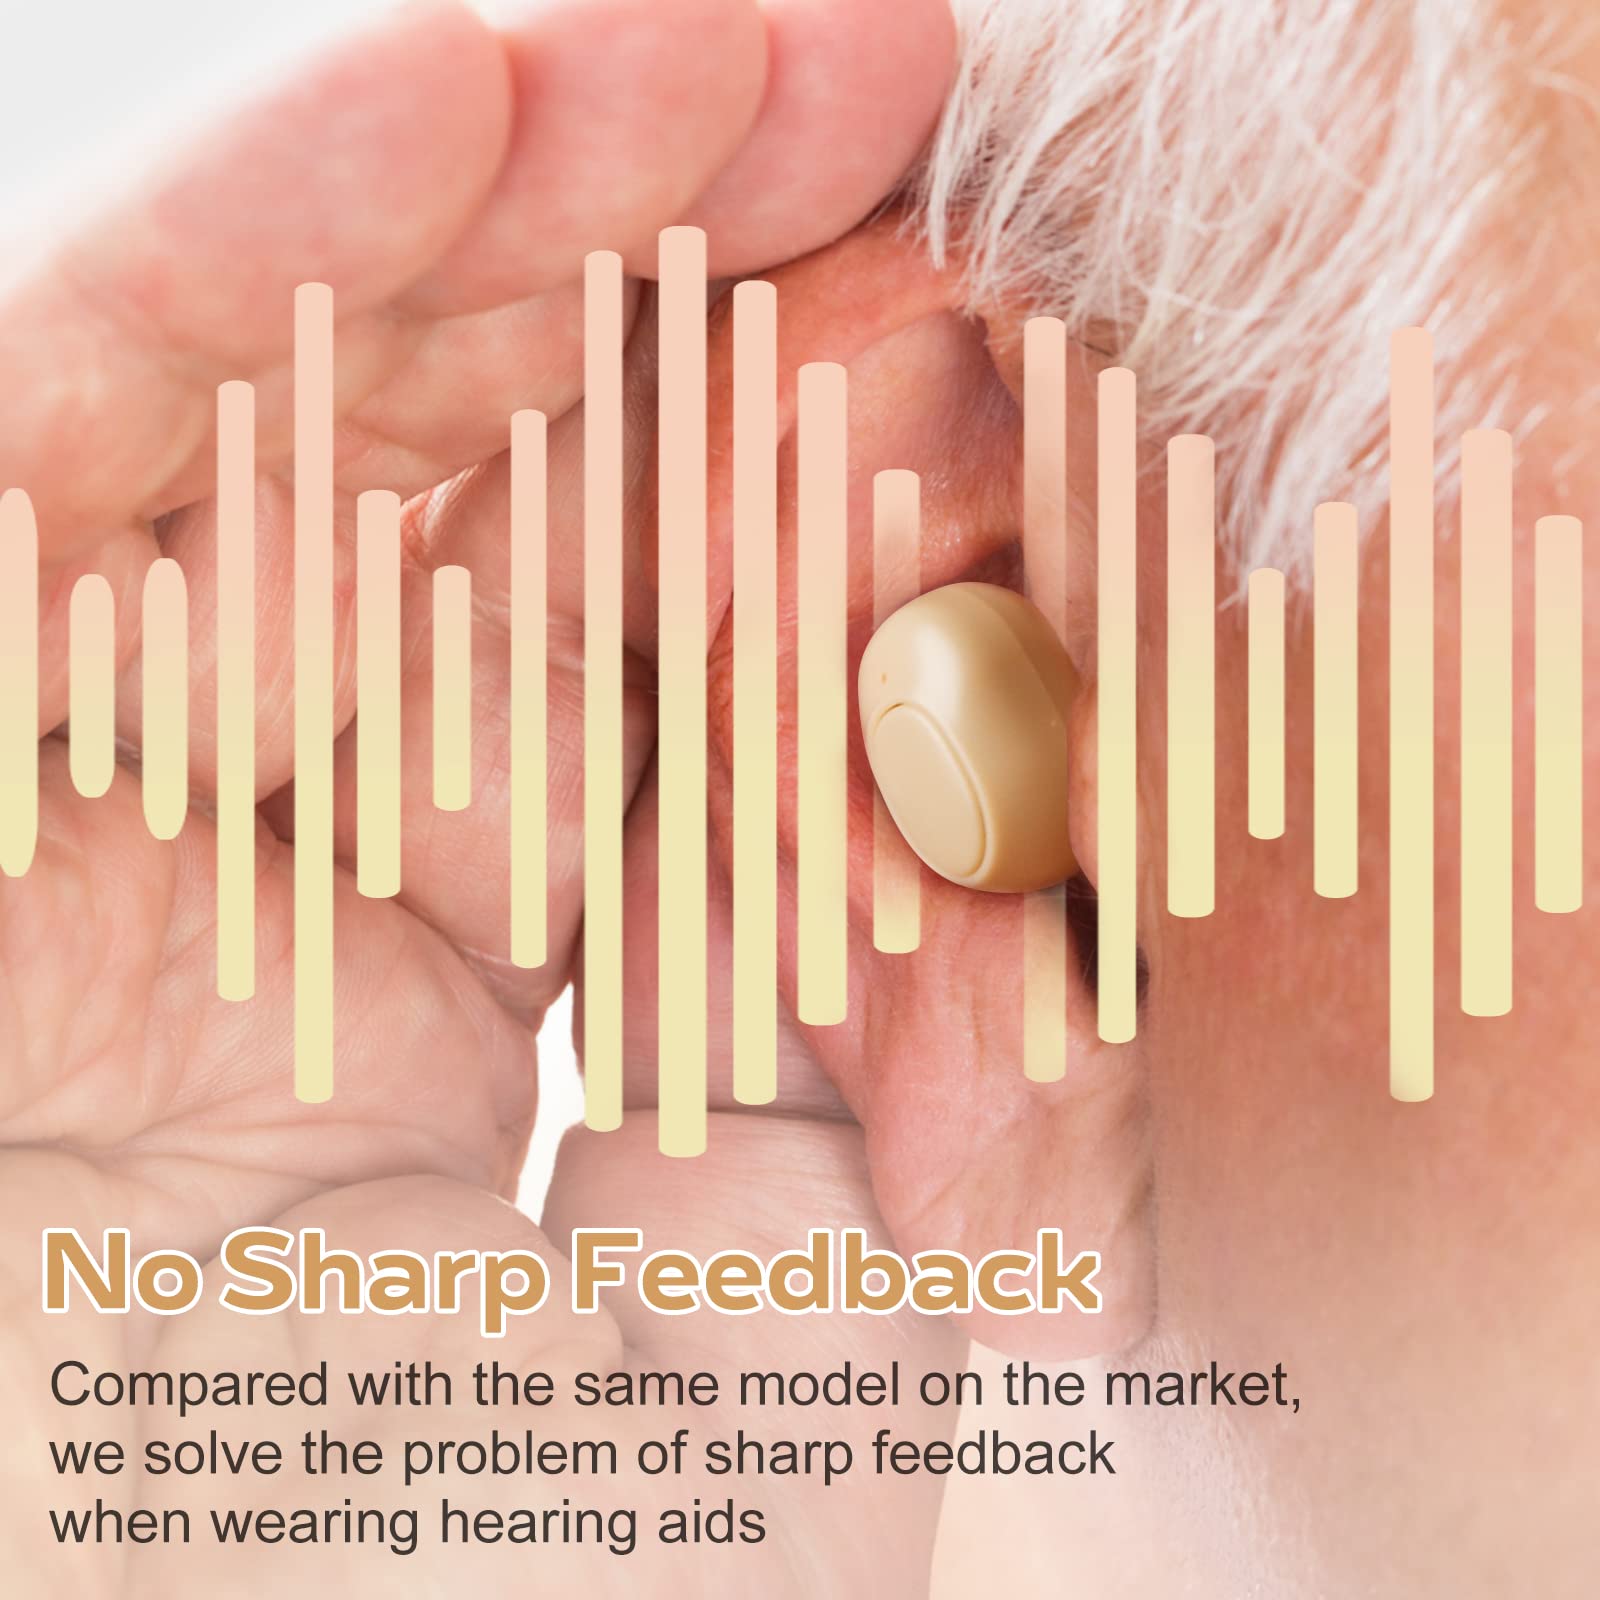 Rechargeable Hearing Aids for Seniors & Adults with Noise Cancelling,Digital Hearing Amplifier with Into Ear No Squealing,Magnetic Contact Charging Box with LED Power Display